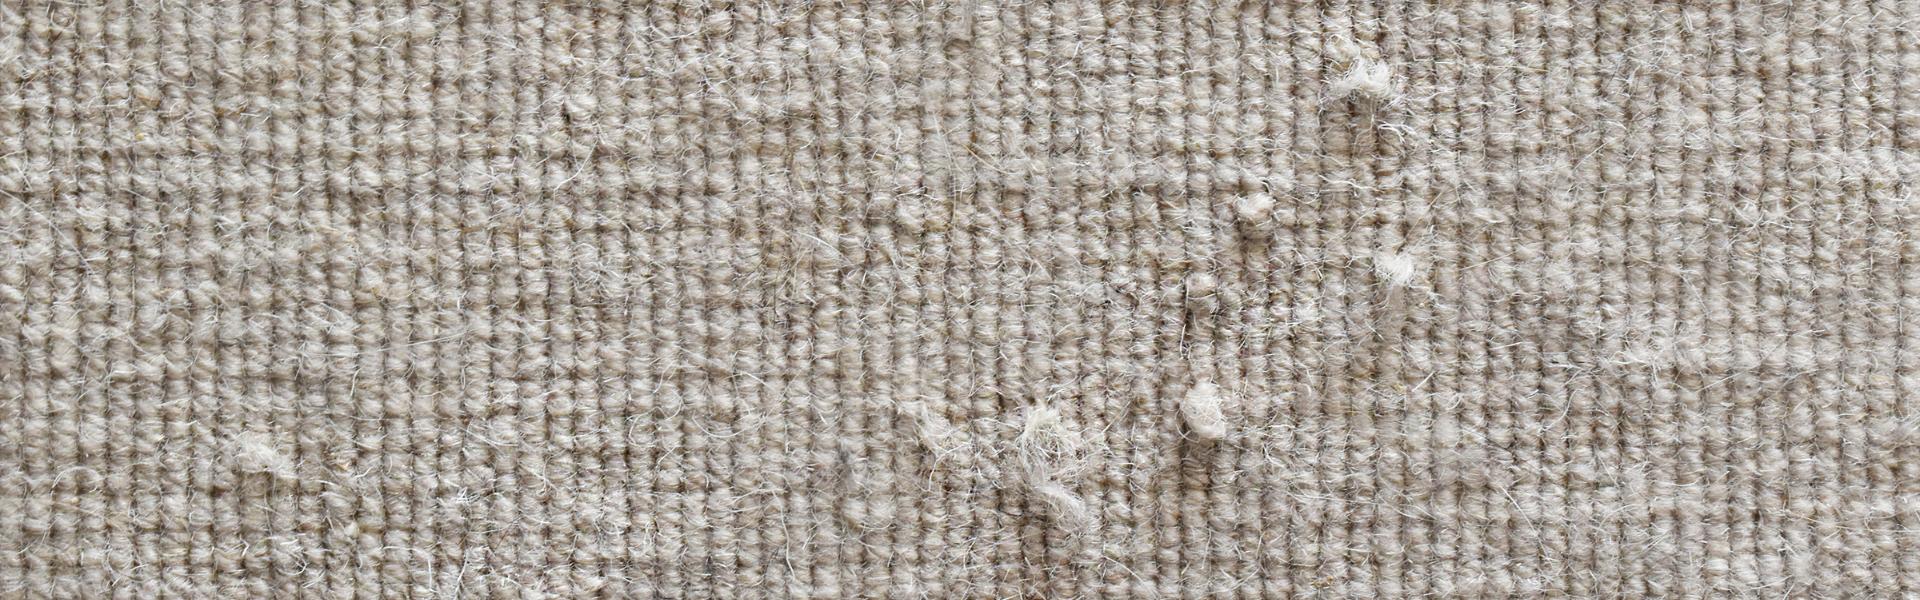 Understanding and preventing early carpet wear and tear